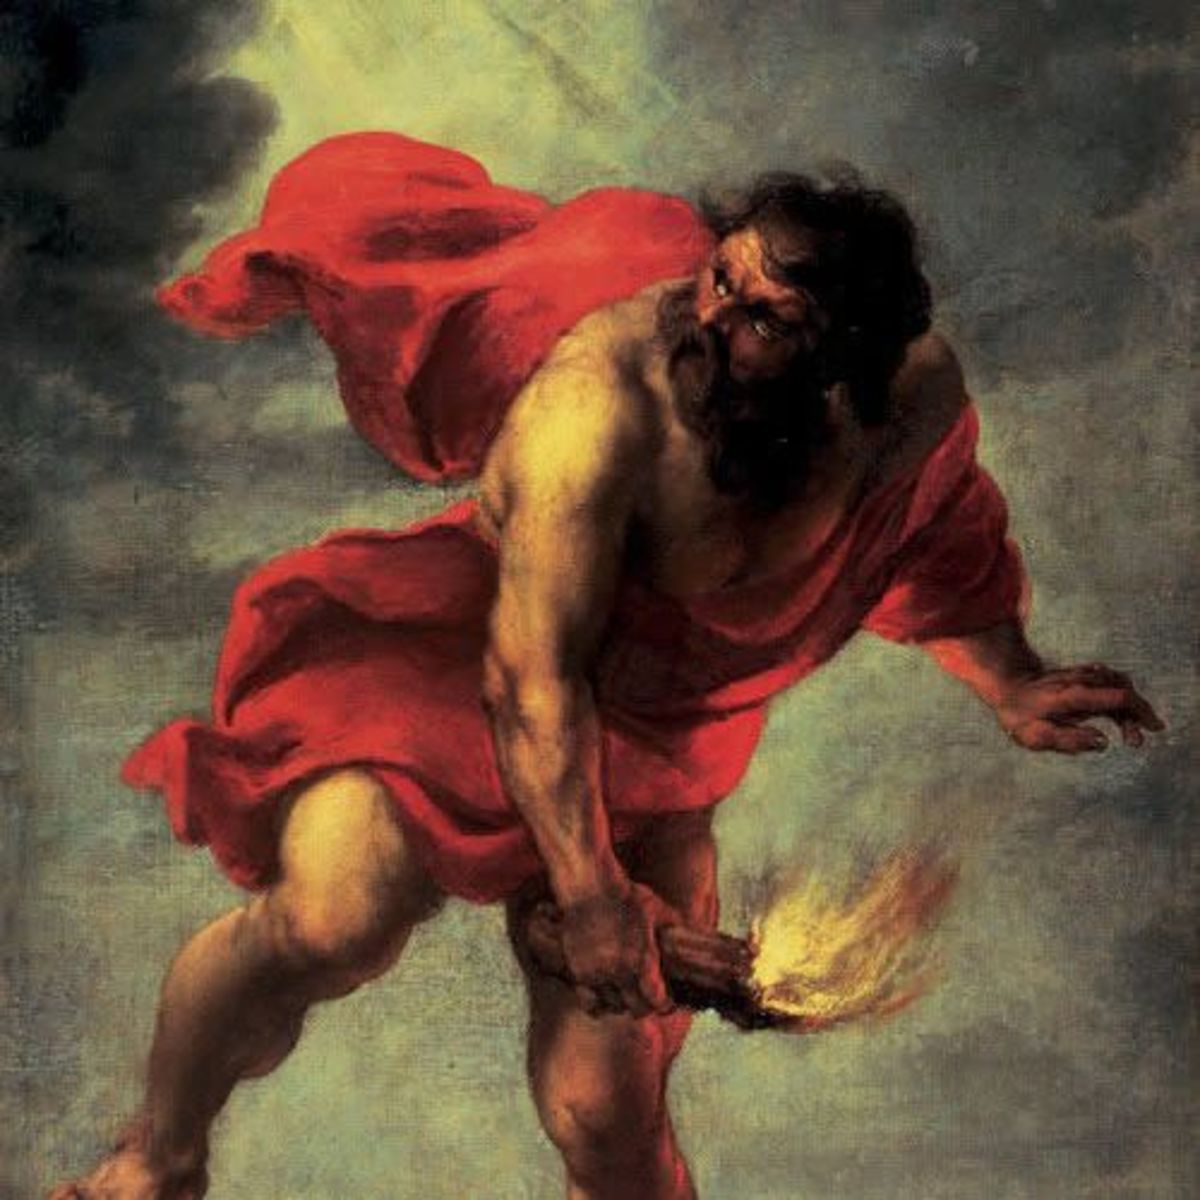 Prometheus stealing fire from Zeus to bestow its wisdom onto humanity.